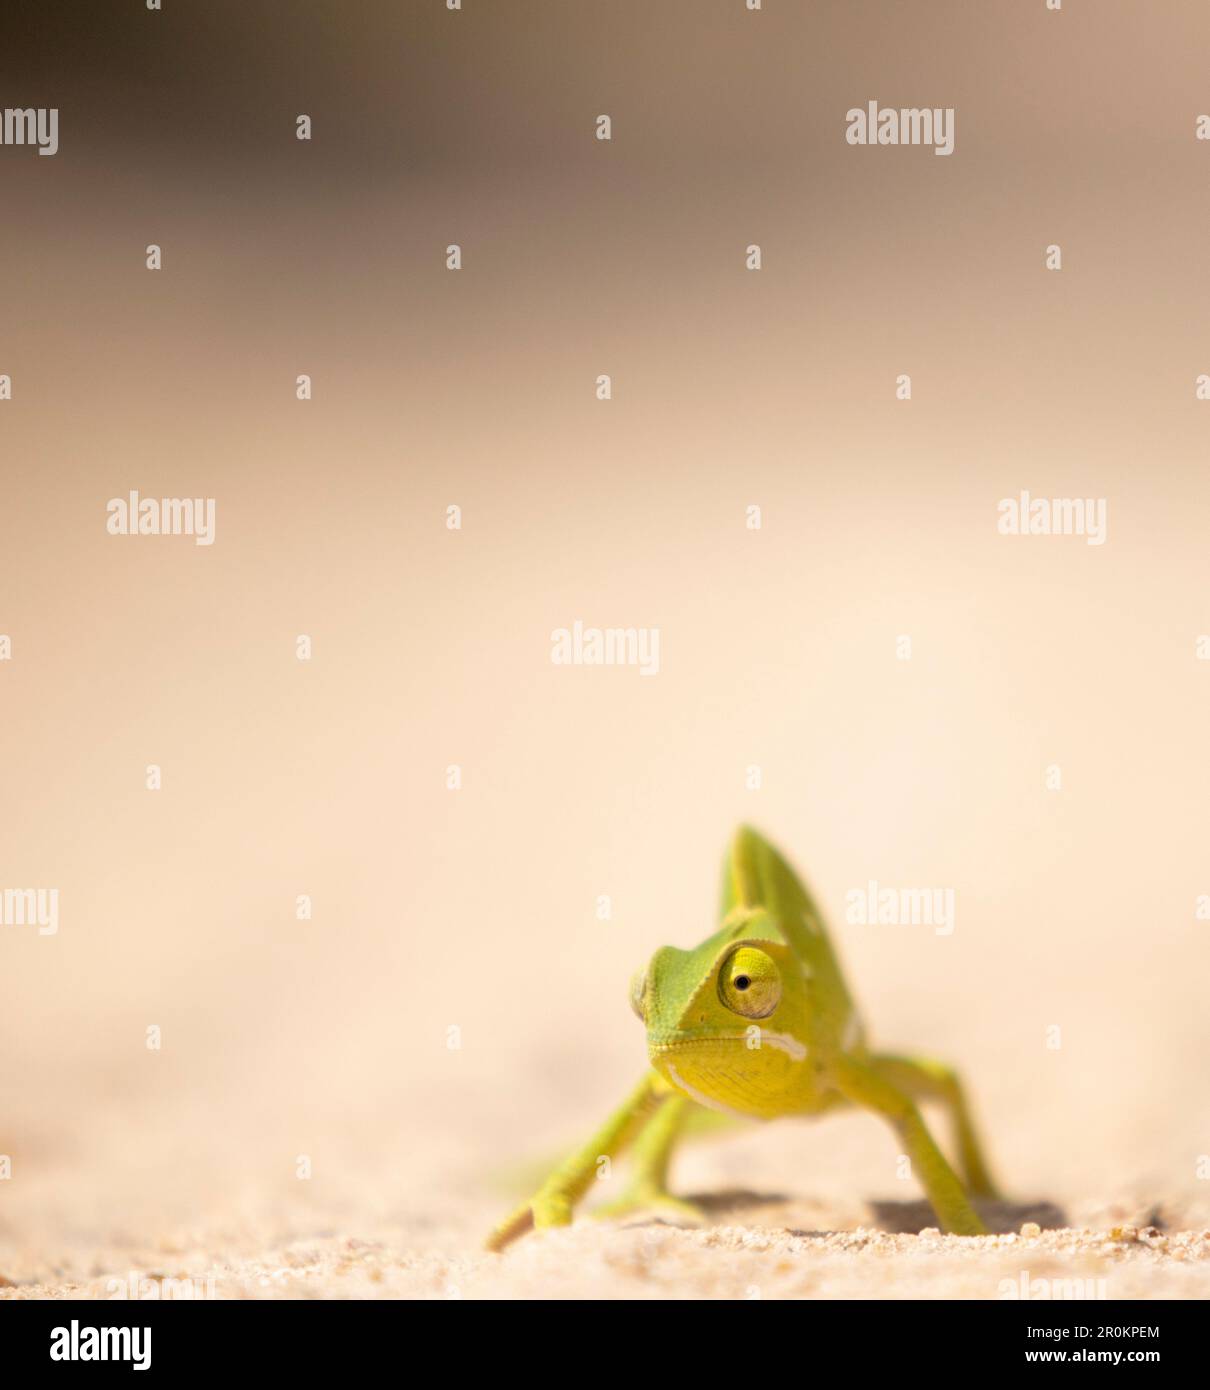 Frontal view of a flap-necked chameleon on the ground deciding which way to go Stock Photo